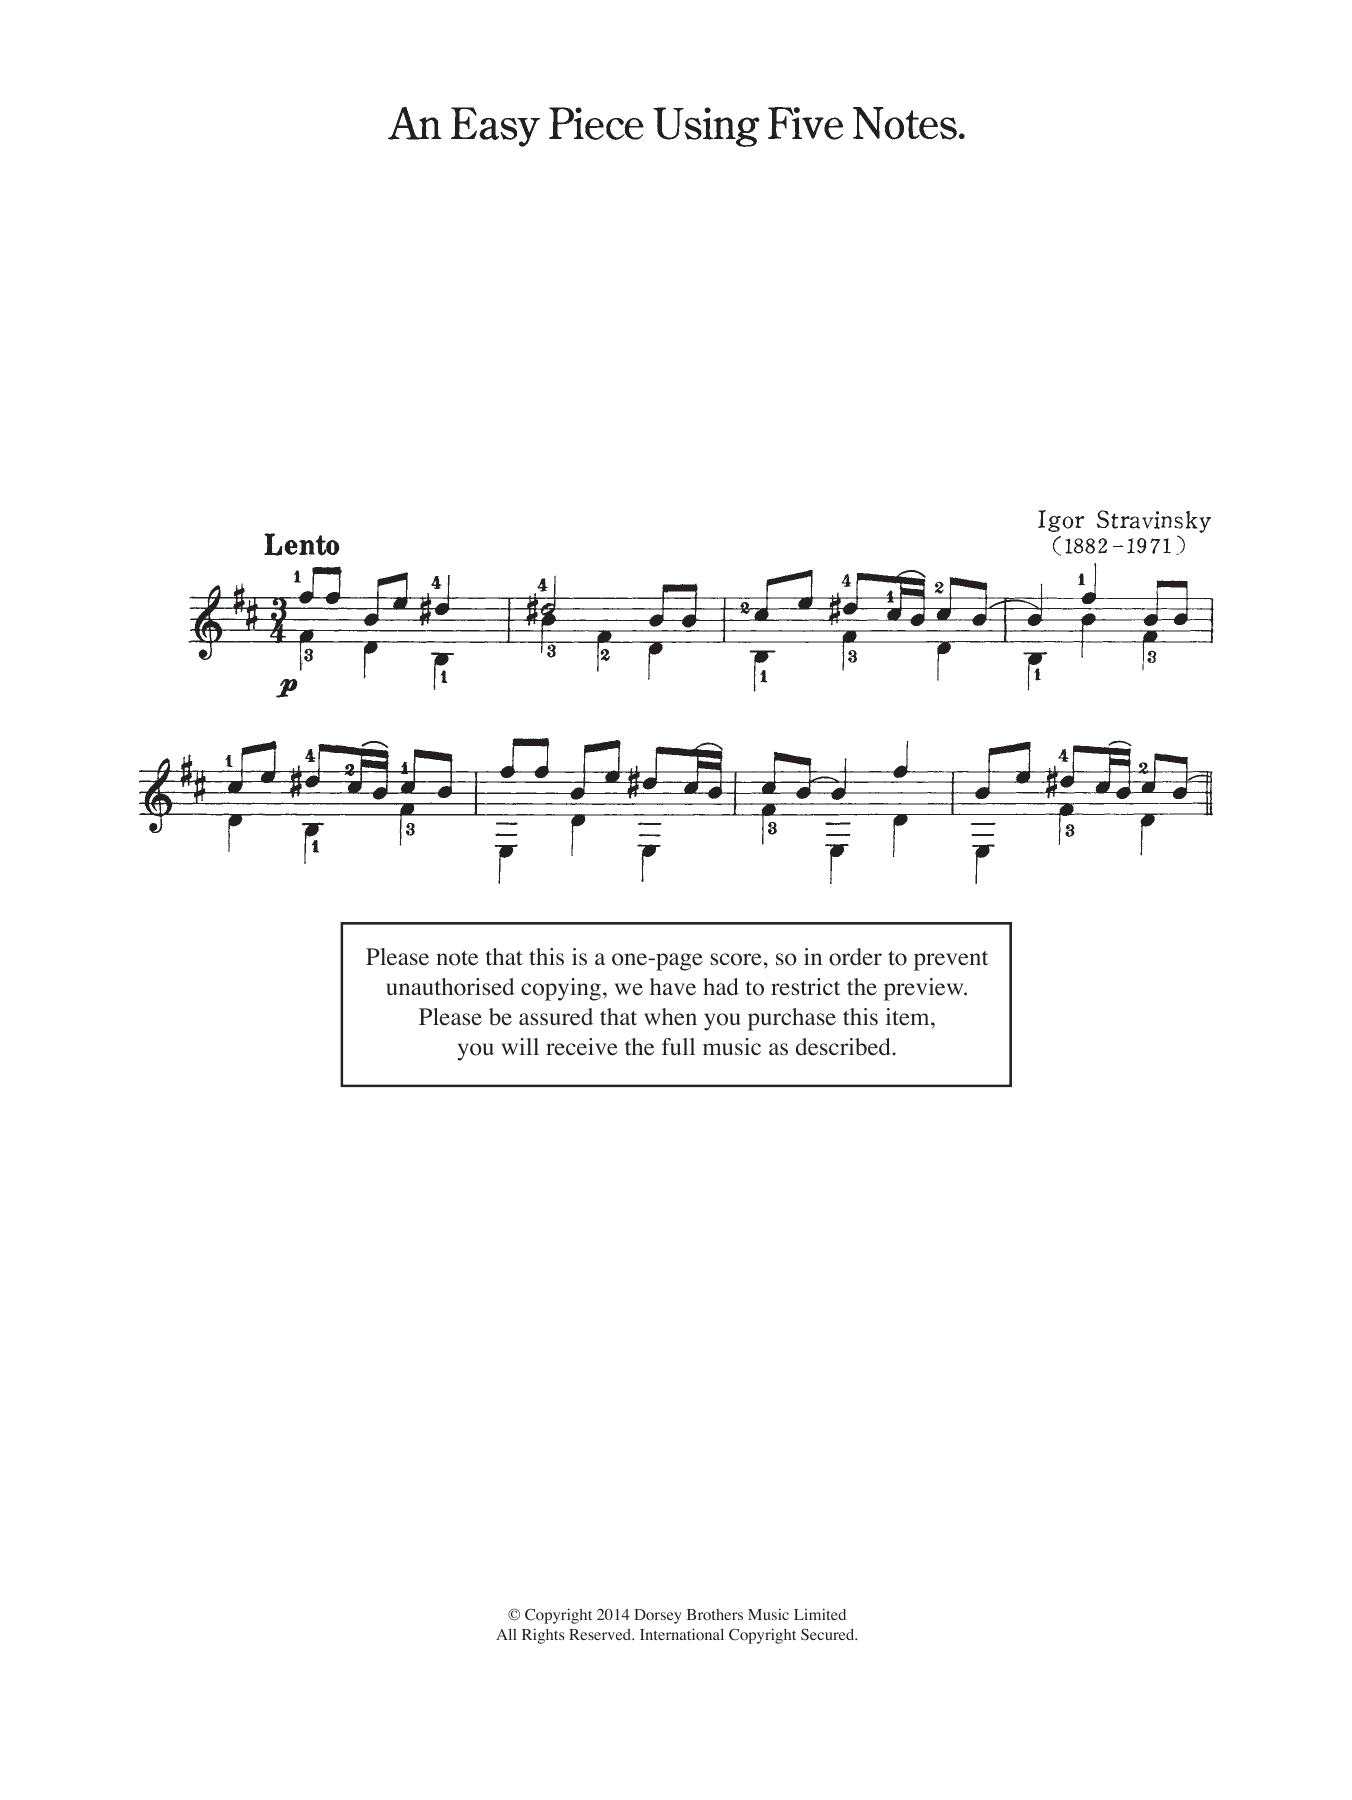 Download Igor Stravinsky An Easy Piece Using Five Notes Sheet Music